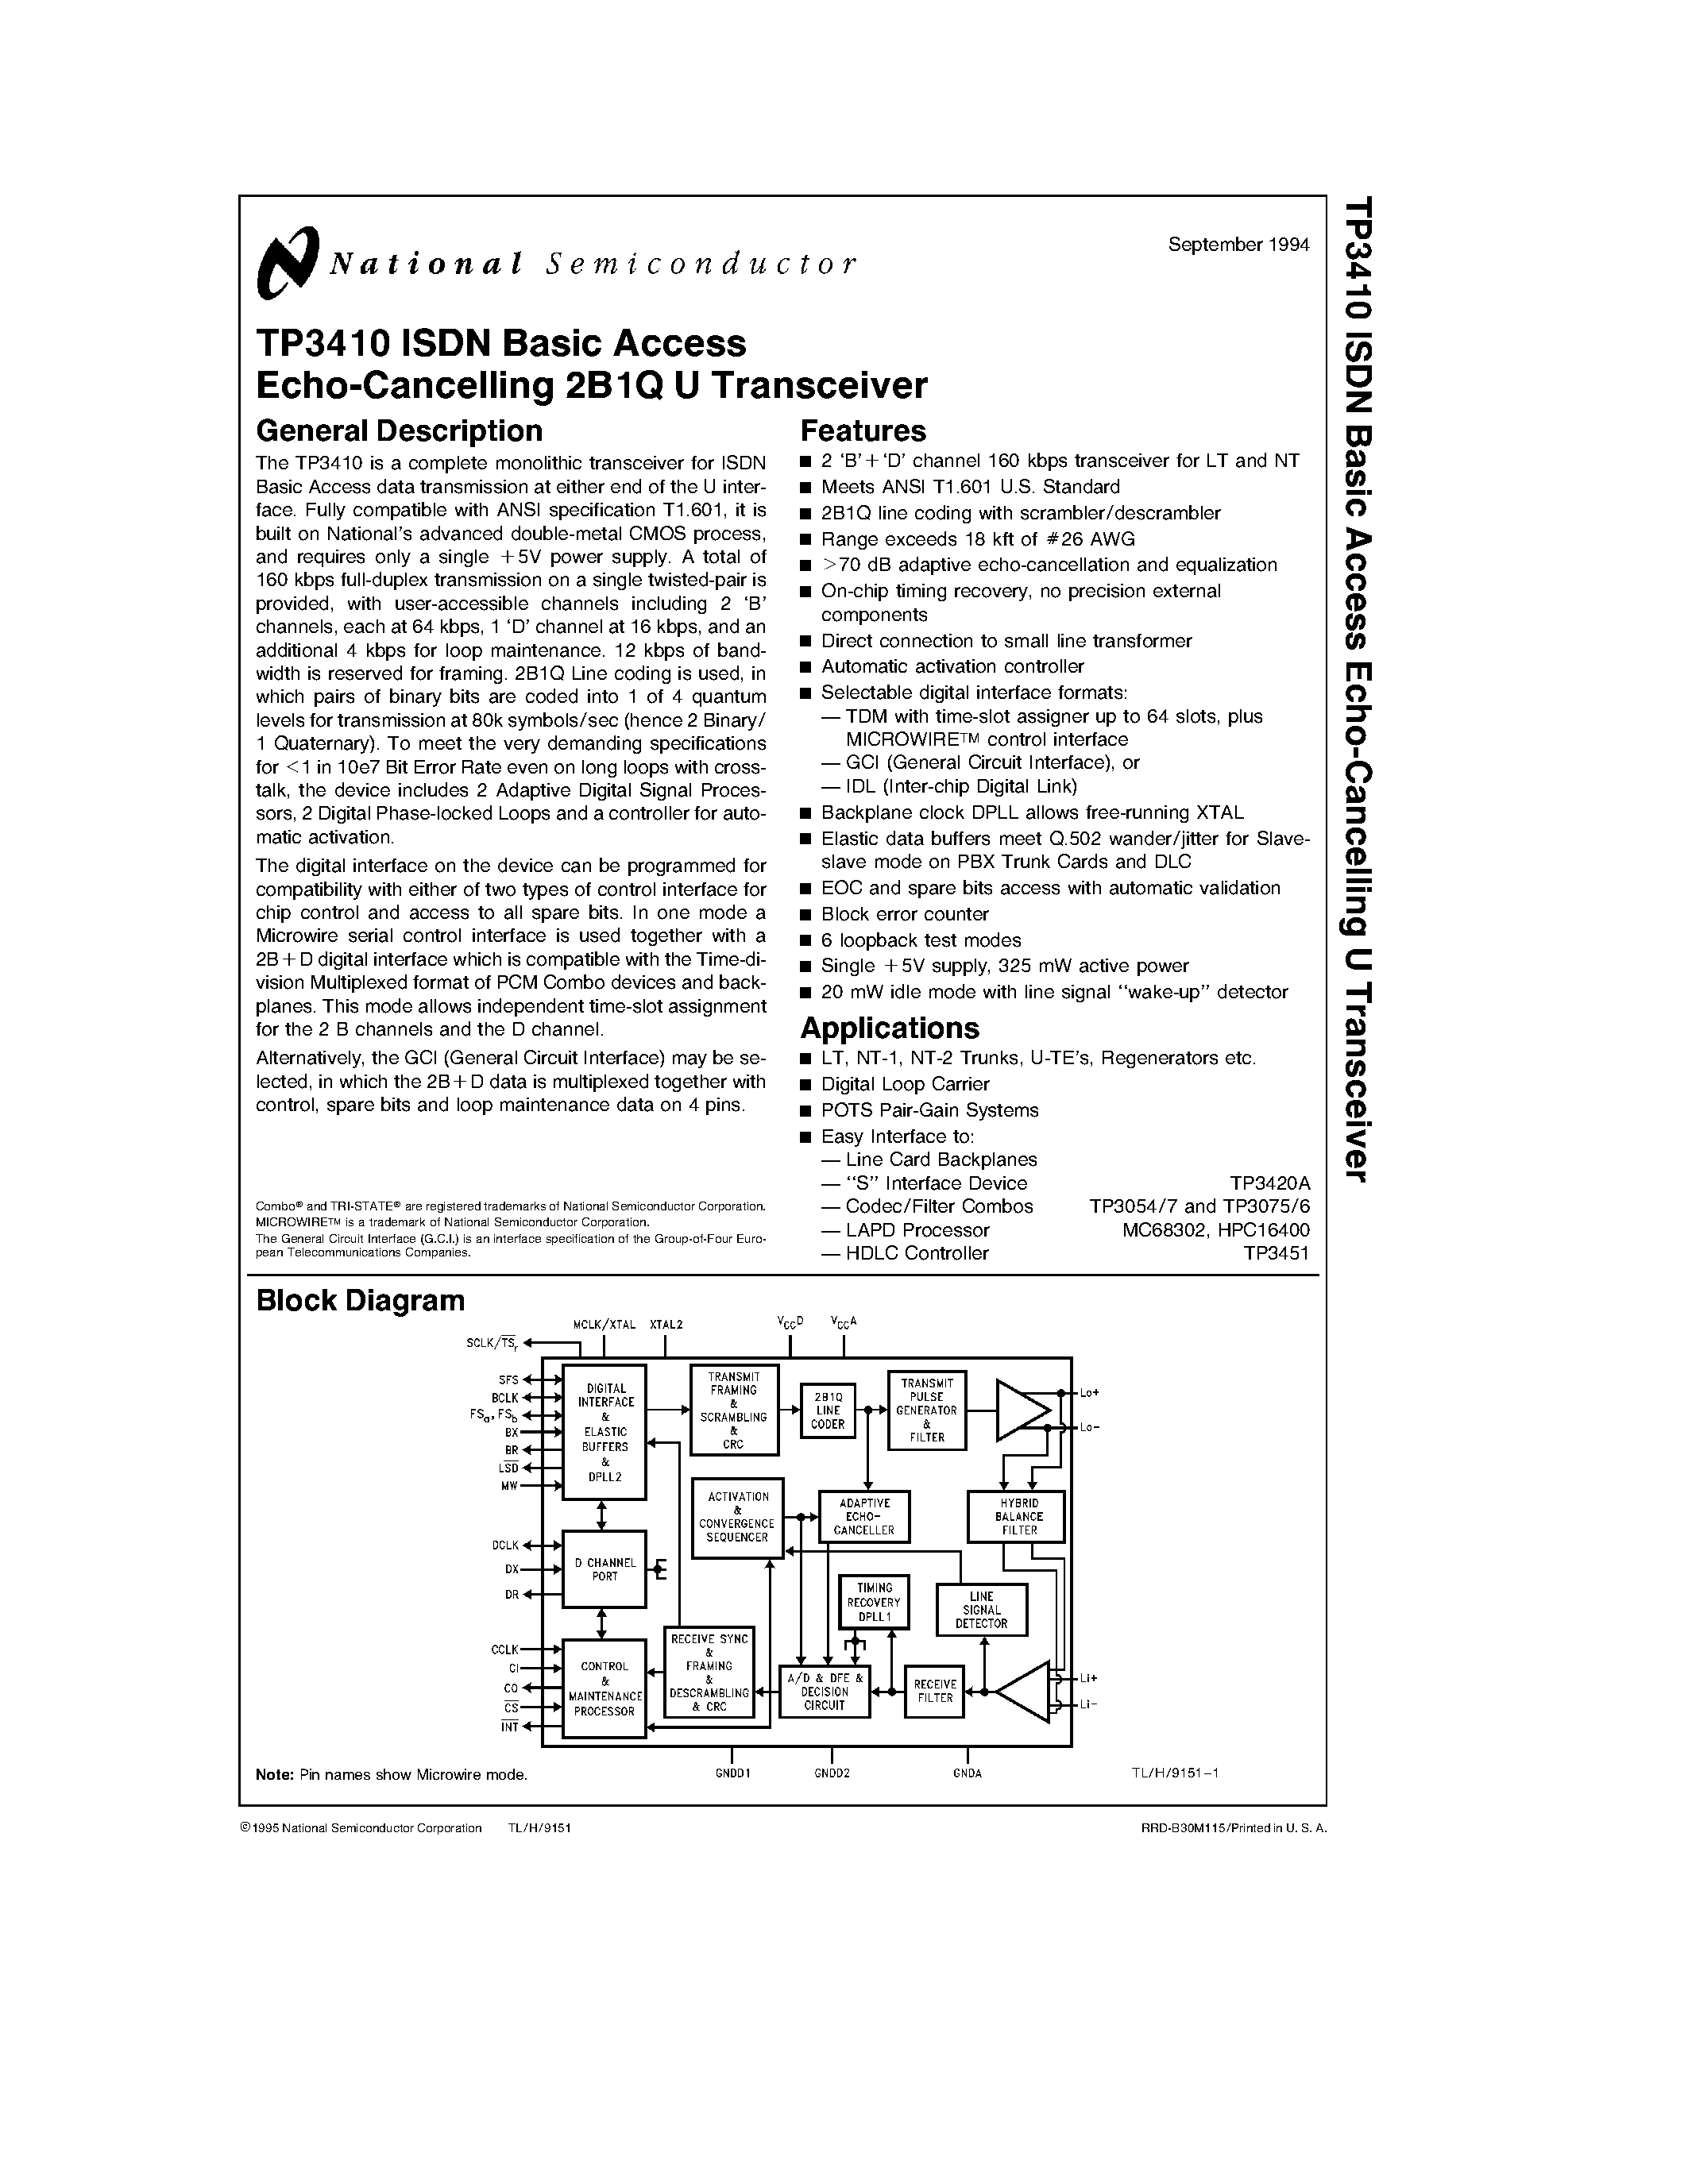 Datasheet TP3410 - TP3410 ISDN Basic Access Echo-Cancelling 2B1Q U Transceiver page 1